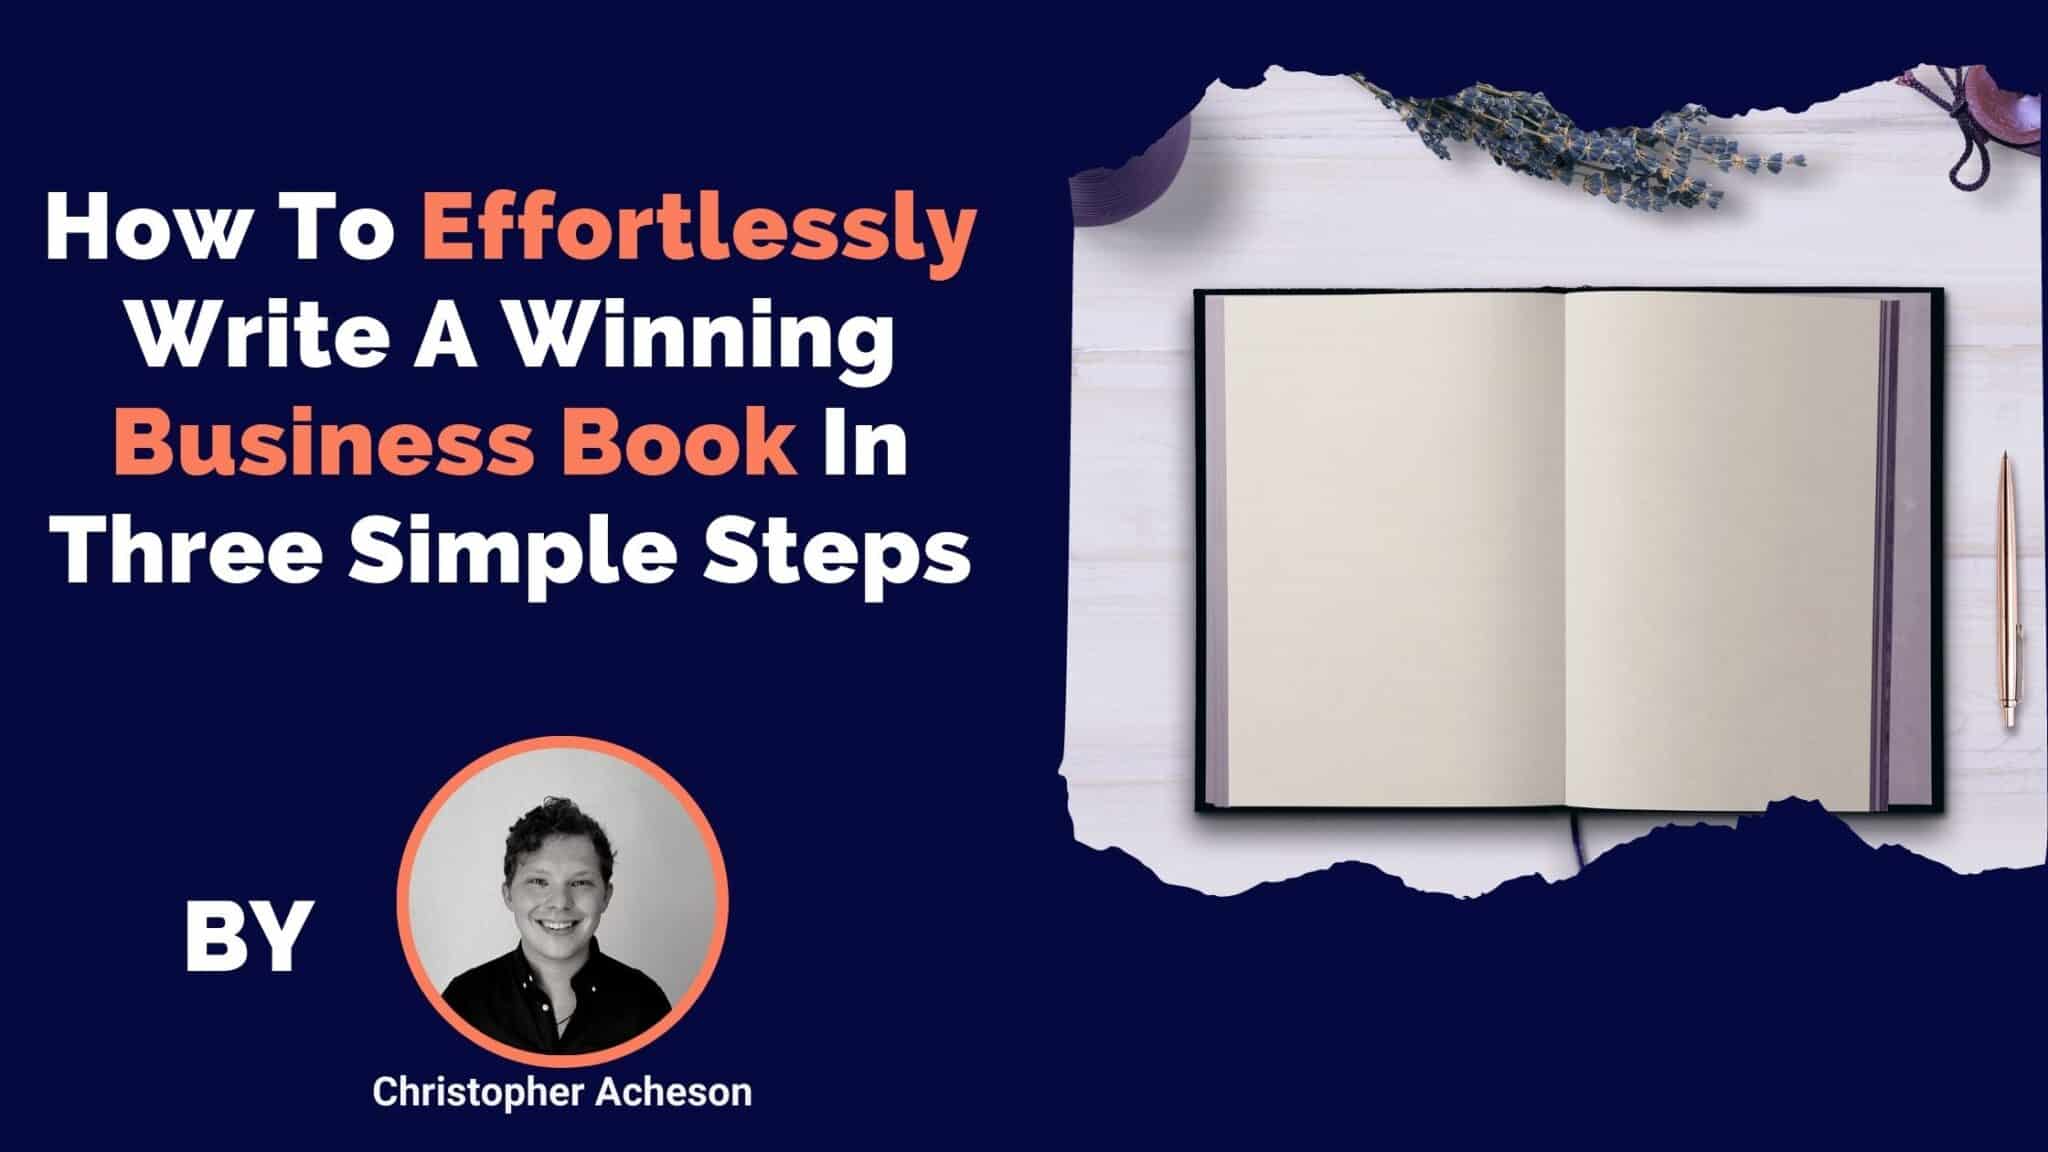 How To Effortlessly Write A Winning Business Book In Three Simple Steps by Christopher Acheson